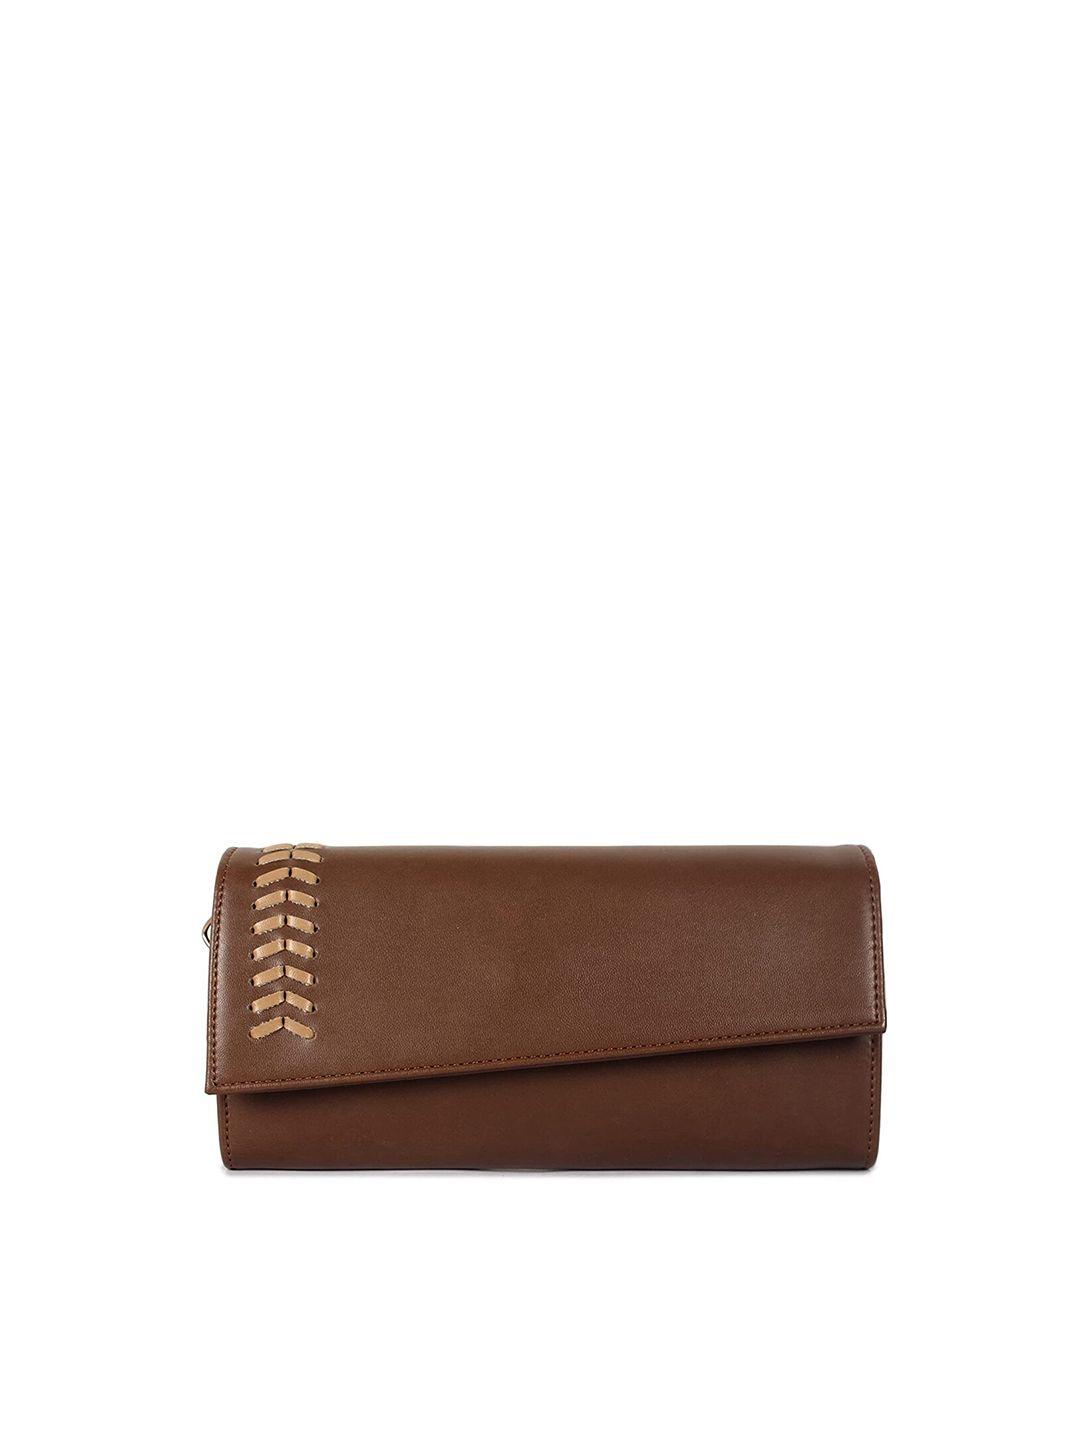 the clownfish women brown & beige woven design quilted envelope